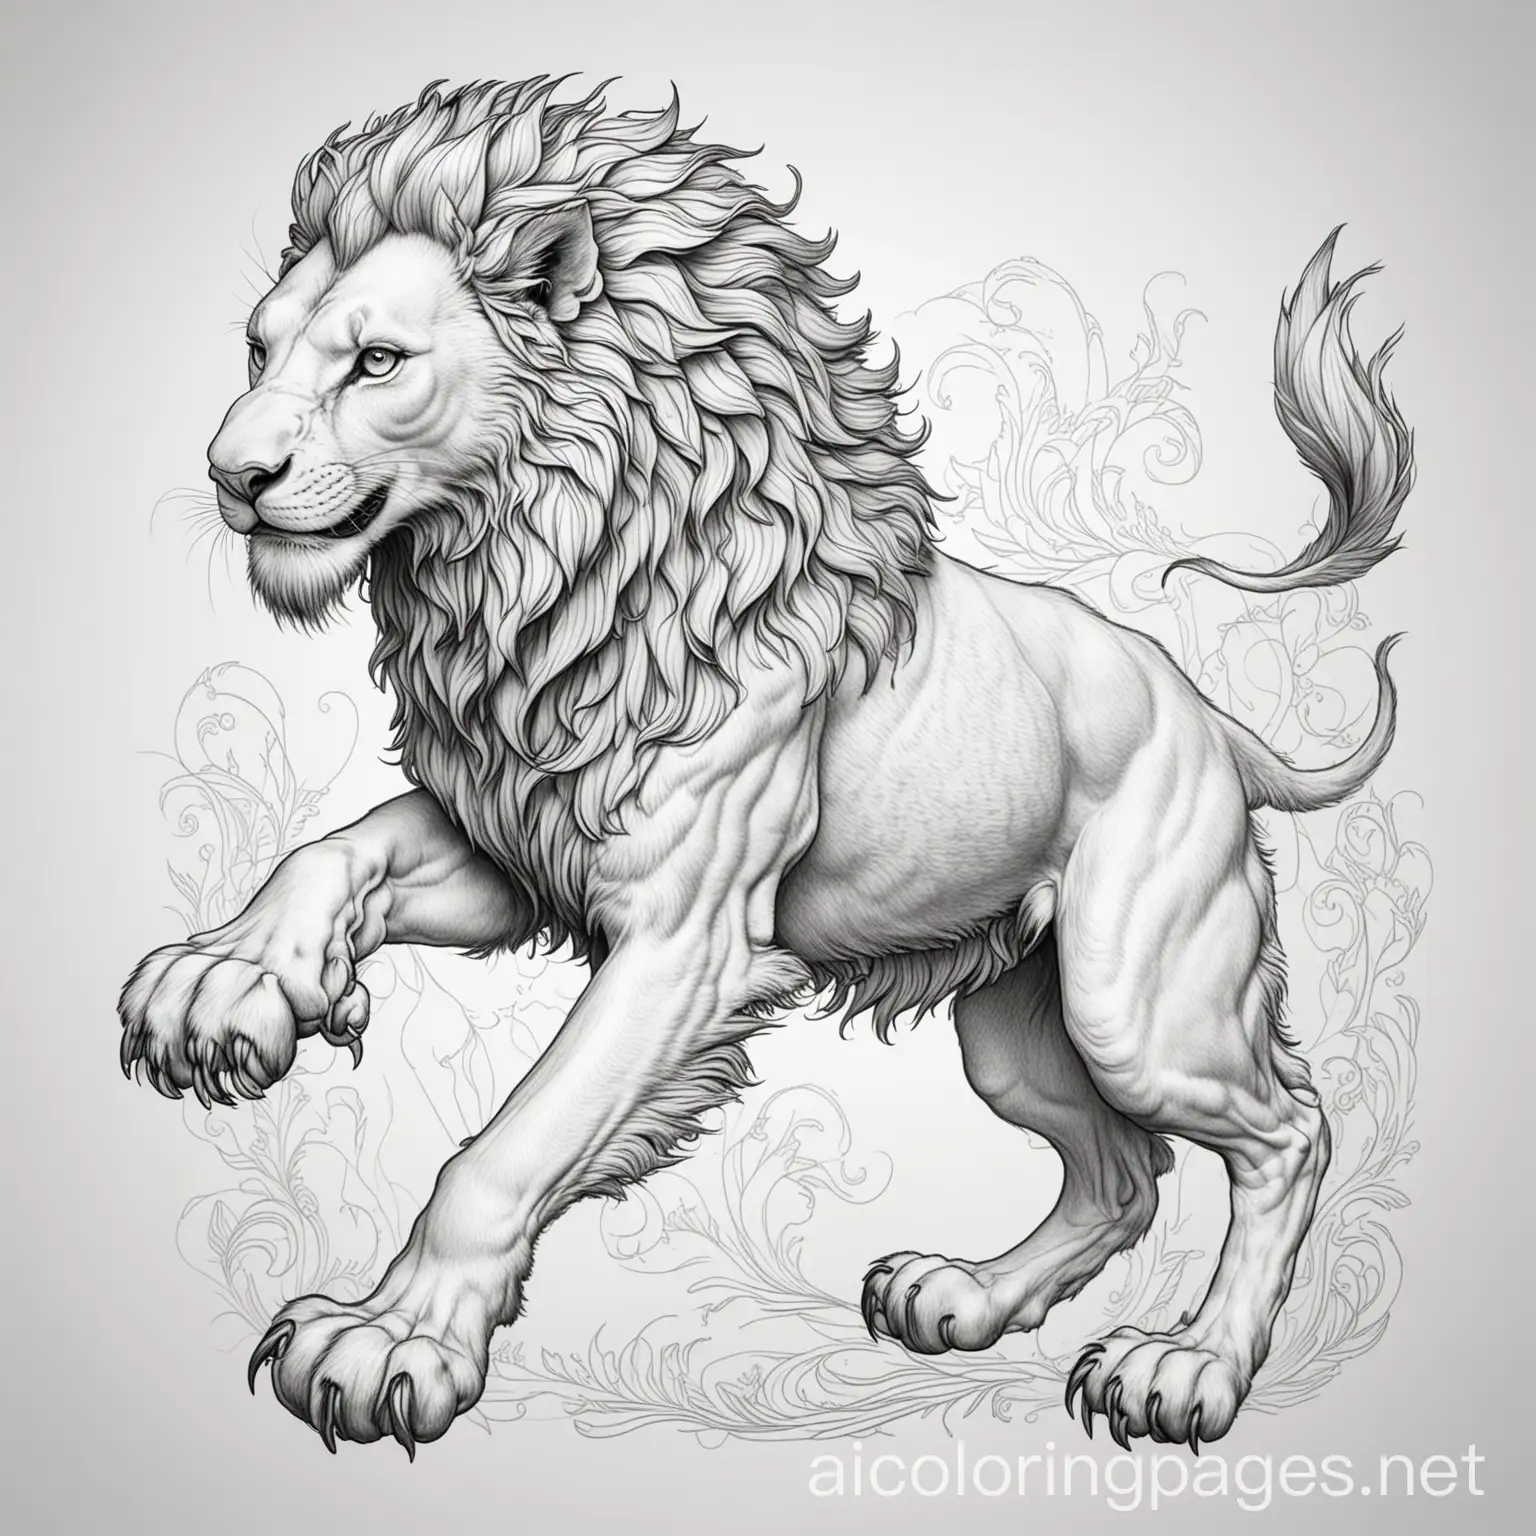 Playful-Griffin-Coloring-Page-Whimsical-LionBodied-Creature-on-White-Background